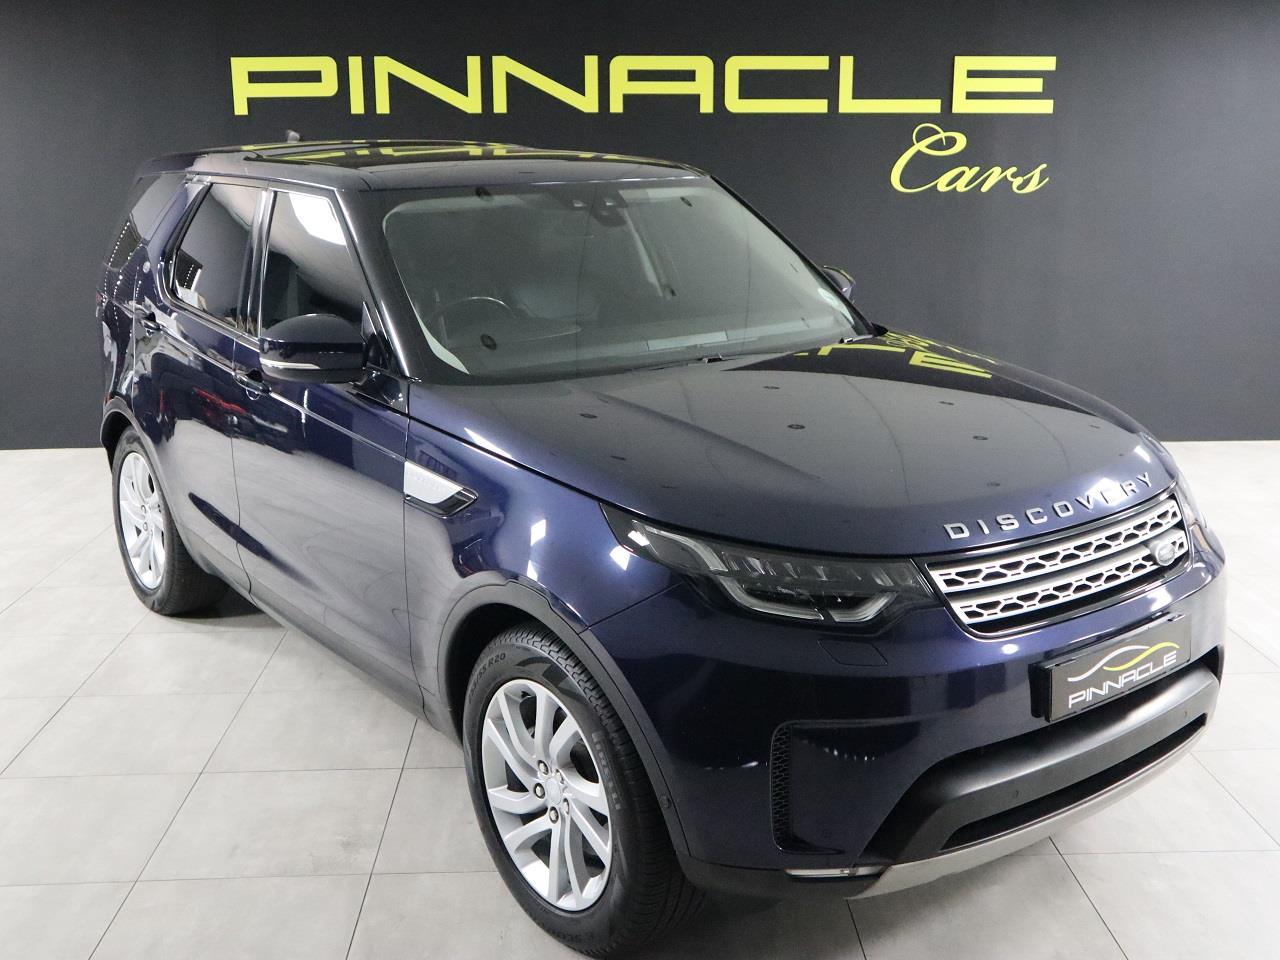 2017 Land Rover Discovery HSE Td6 For Sale